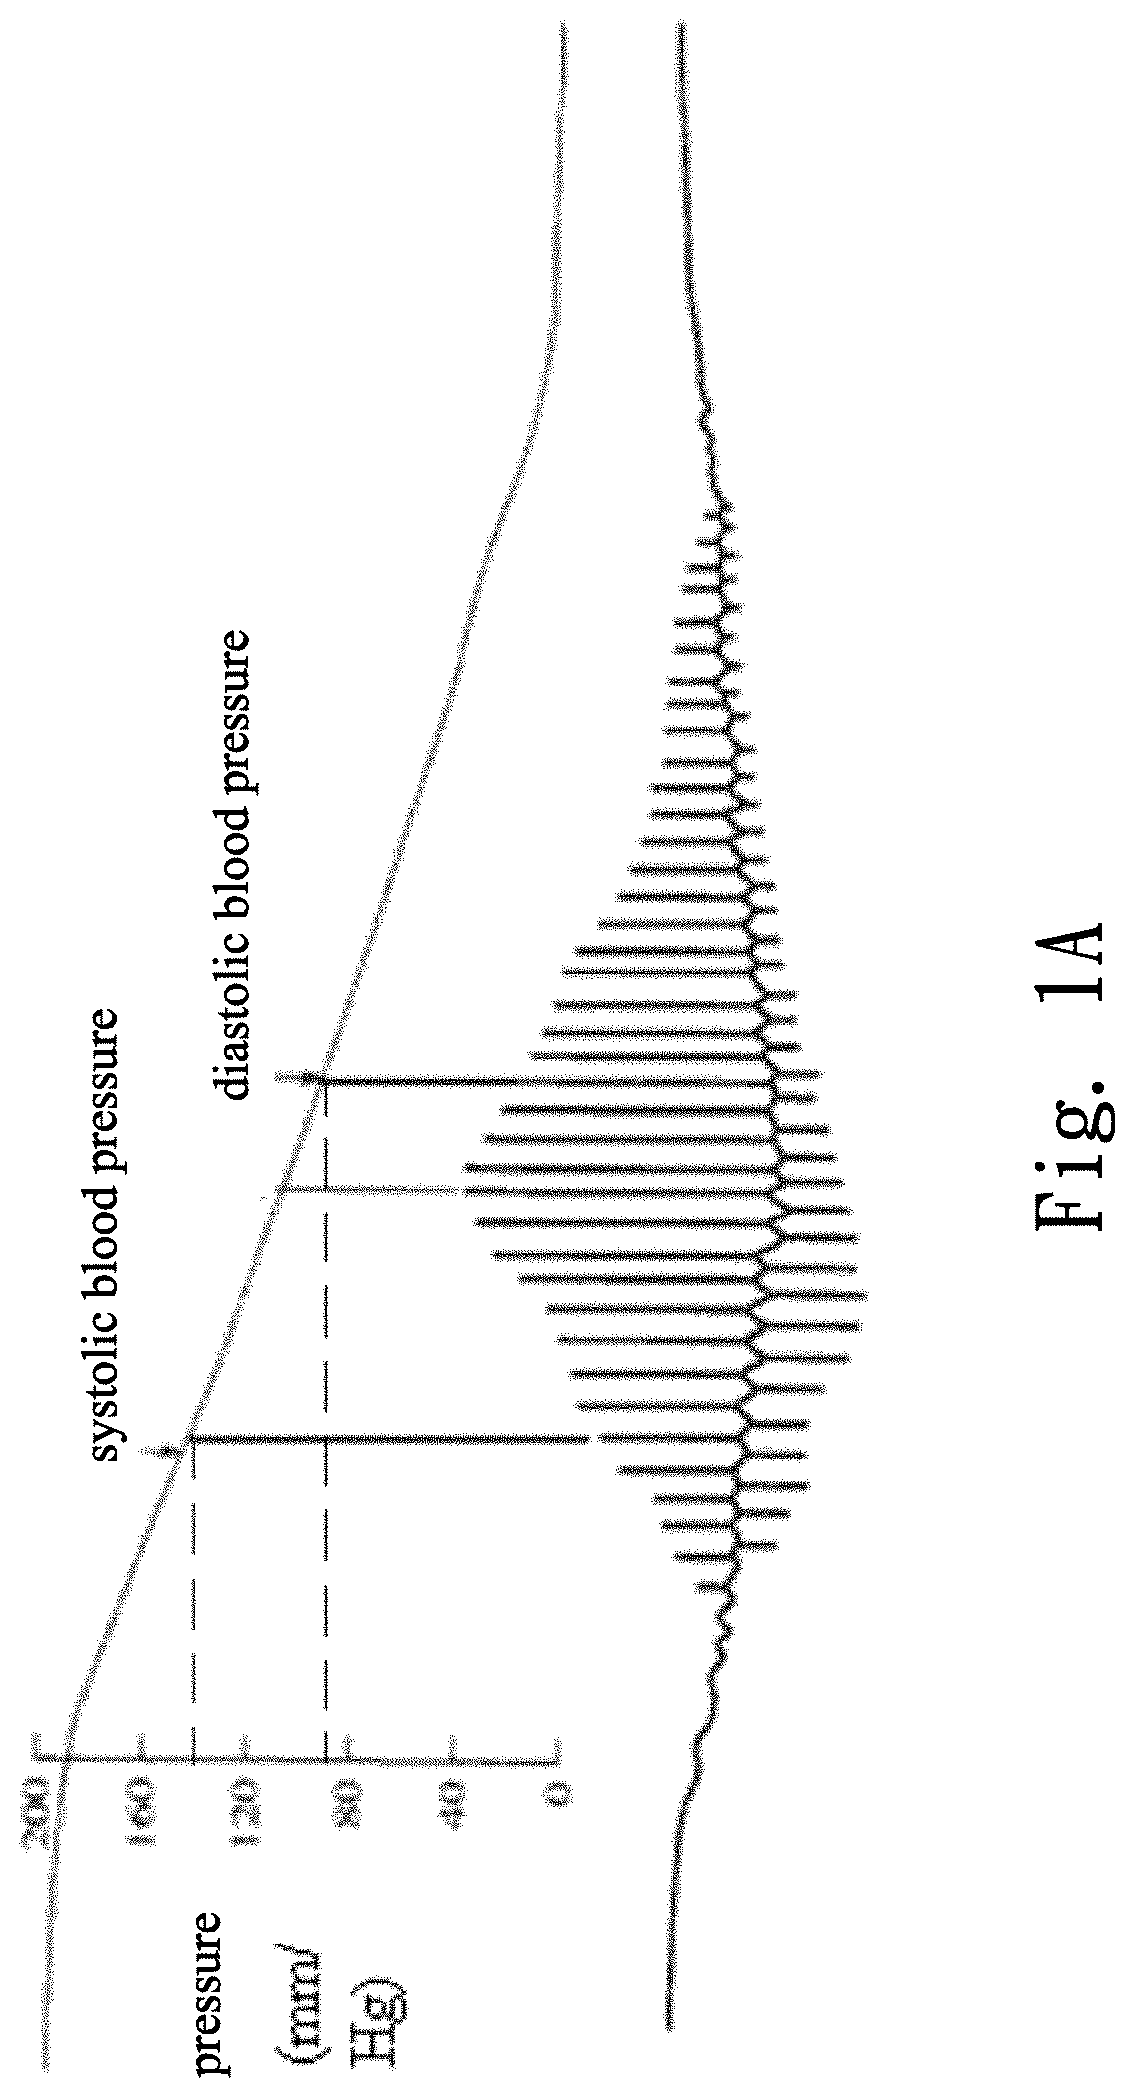 Smart personal portable blood pressure measuring system and method for calibrating blood pressure measurement using the same